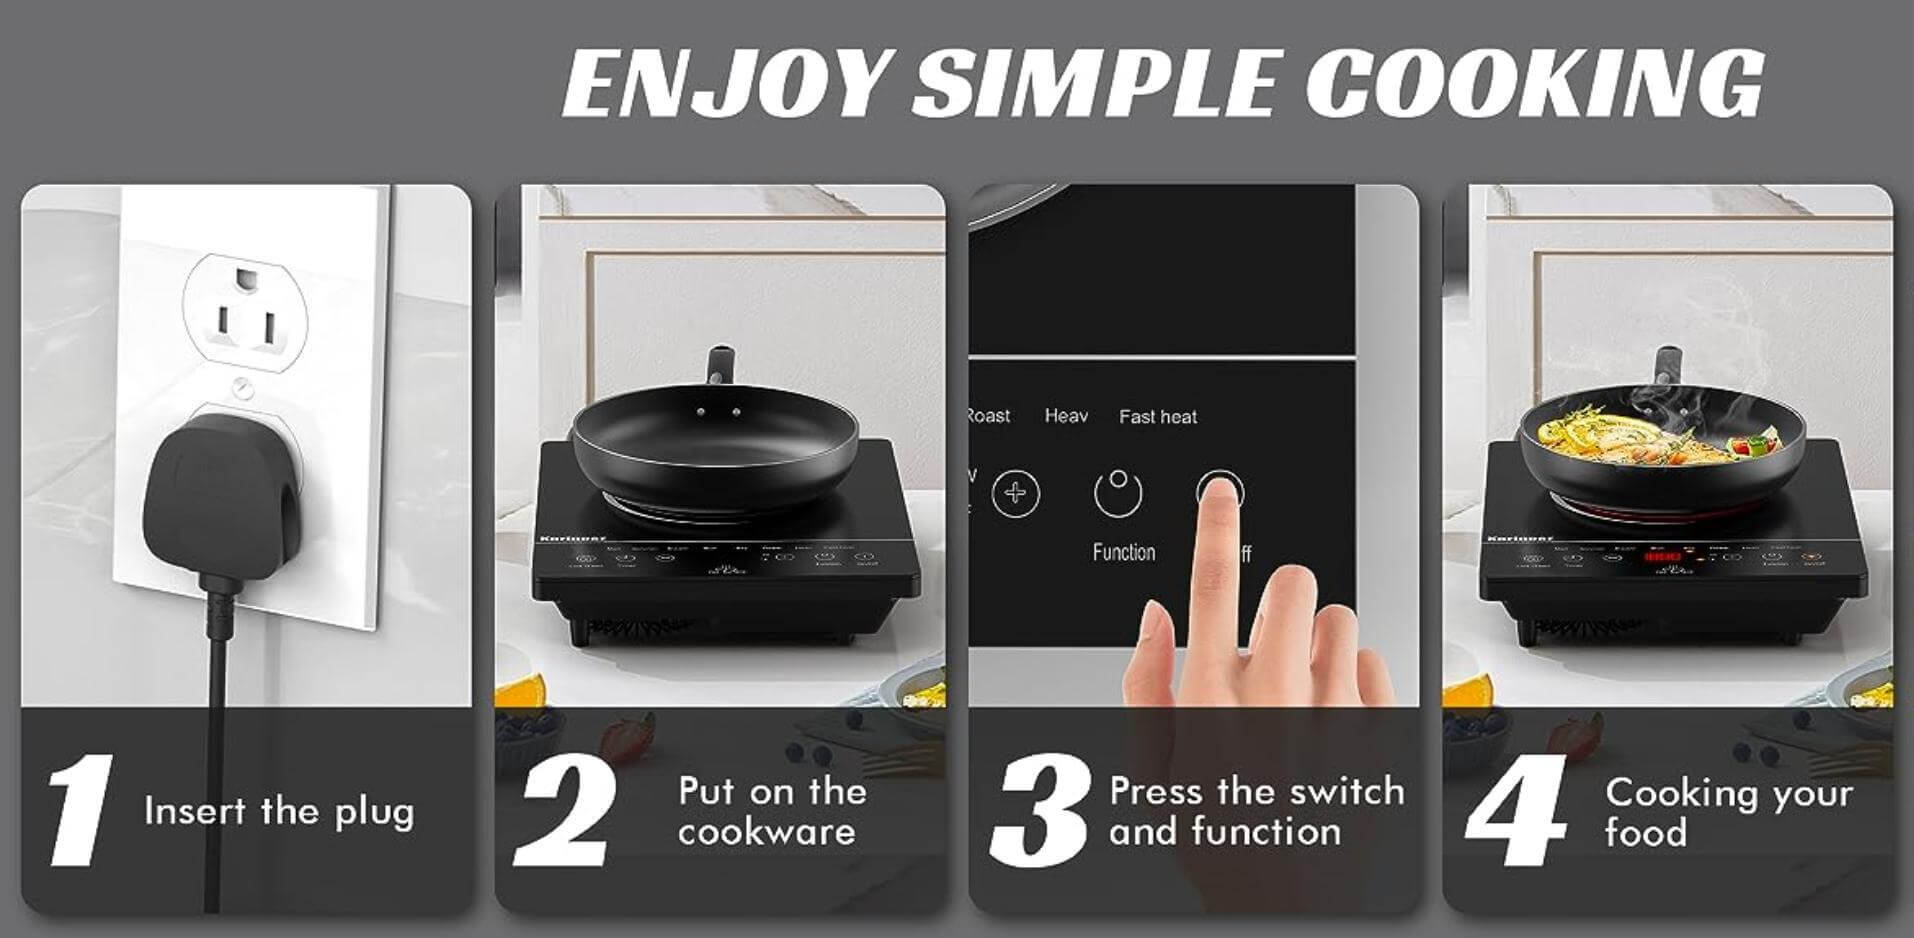 This portable electric stove is suitable for 110~120v voltage, which conforms to the American family standard voltage. 